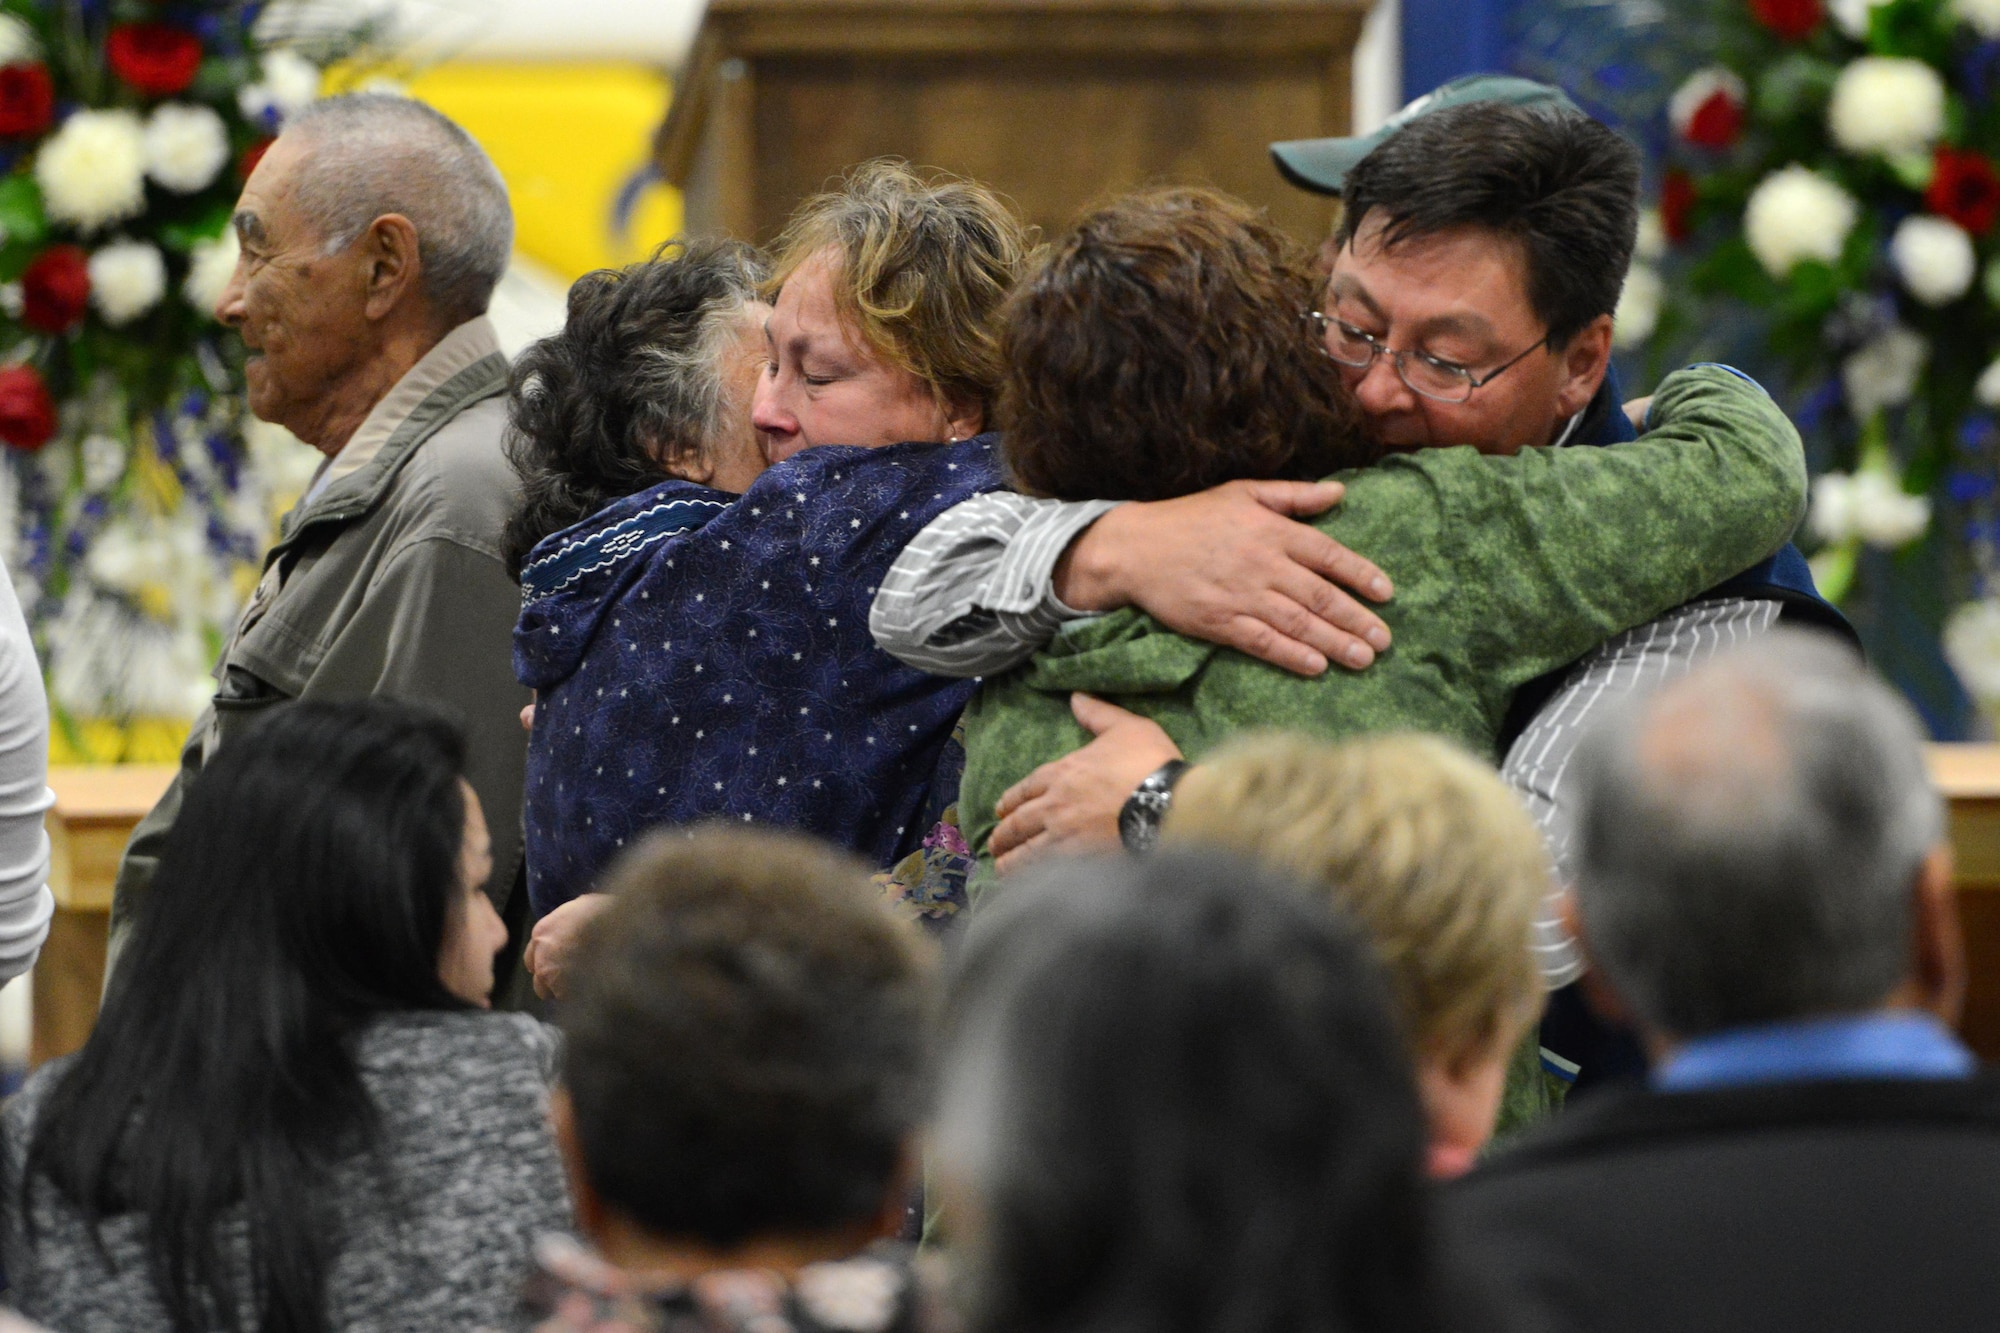 Friends and family of former Alaska National Guard Adjutant General Maj. Gen. John Schaeffer, Jr, share an embrace following the memorial service of the late general, at Kotzebue, Alaska, Aug. 31, 2016. Schaeffer enlisted in the Alaska National Guard in 1957, and served for 34 years.  Schaeffer was the first Alaska Native two-star general of the Alaska National Guard and commissioner of the Alaska Department of Military and Veterans Affairs. He is survived by Mary his wife of 56 years. (U.S. Air Force photo by Airman 1st Class Javier Alvarez)